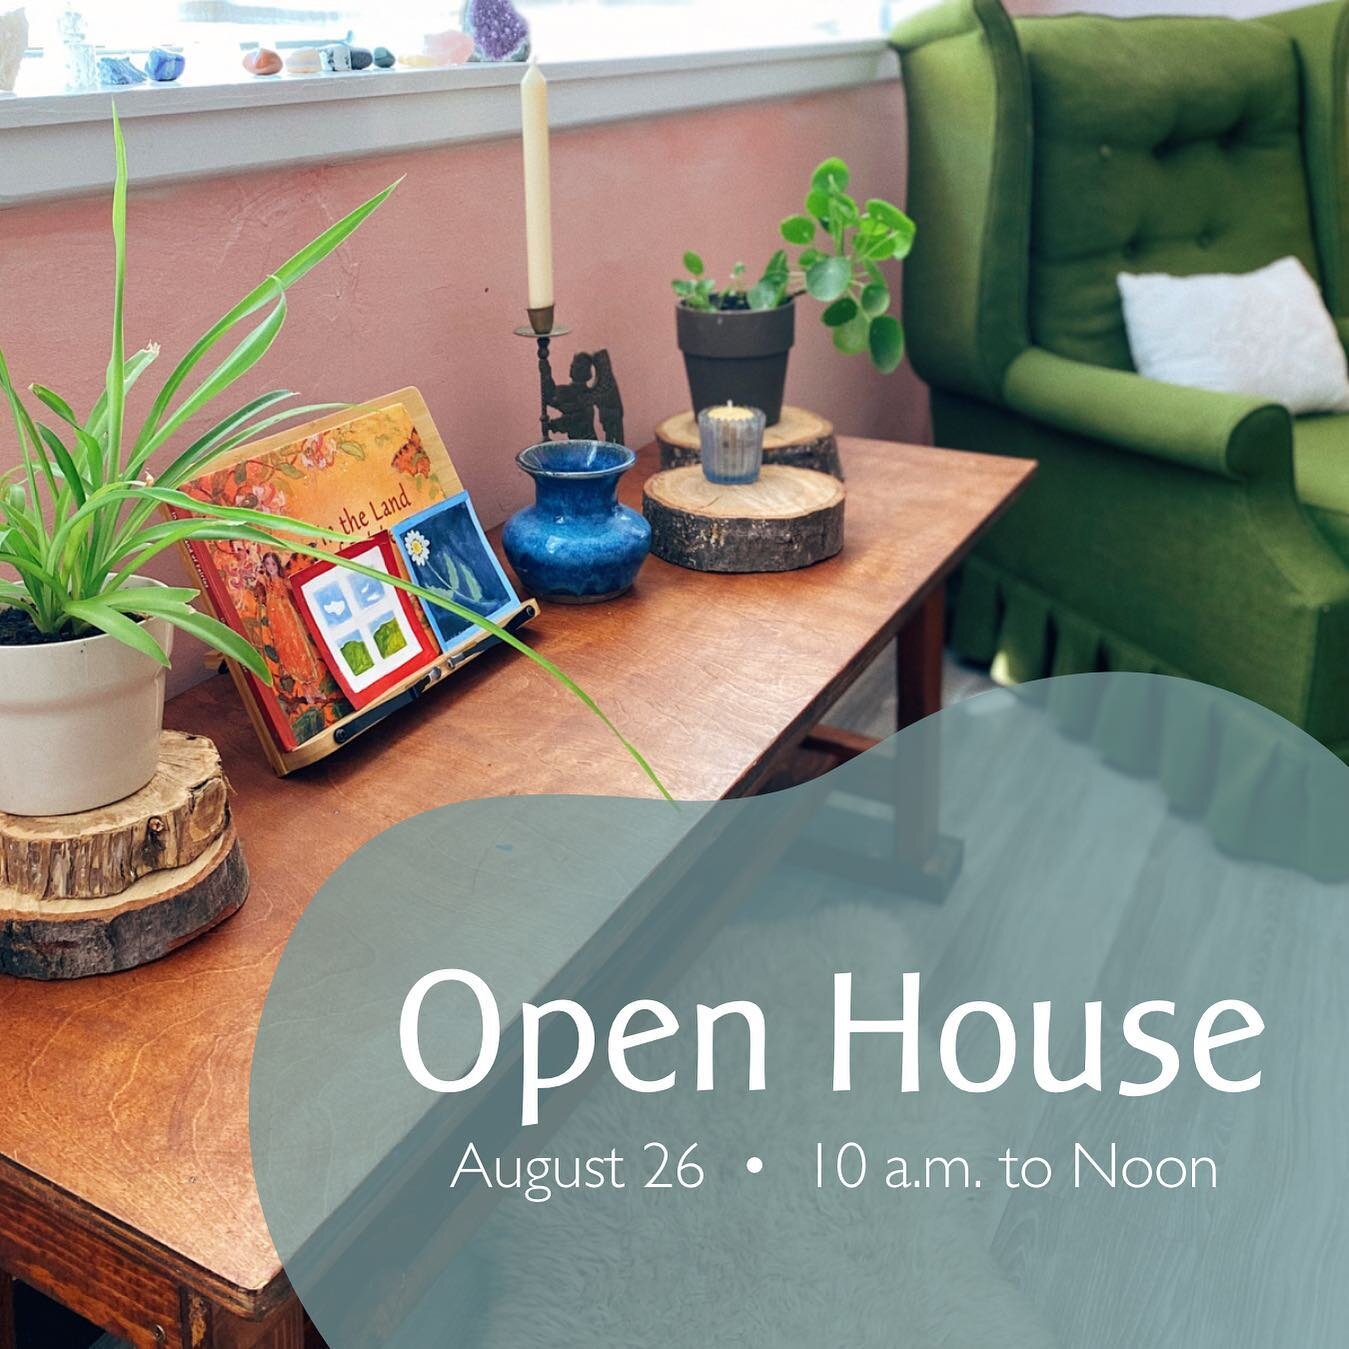 Friends ~ with the new school year approaching, we&rsquo;d love to extend an invitation to you for our Back-to-School Open House. New and returning families can join us Saturday, August 26, anytime between 10 a.m. and noon to meet our teachers and vi